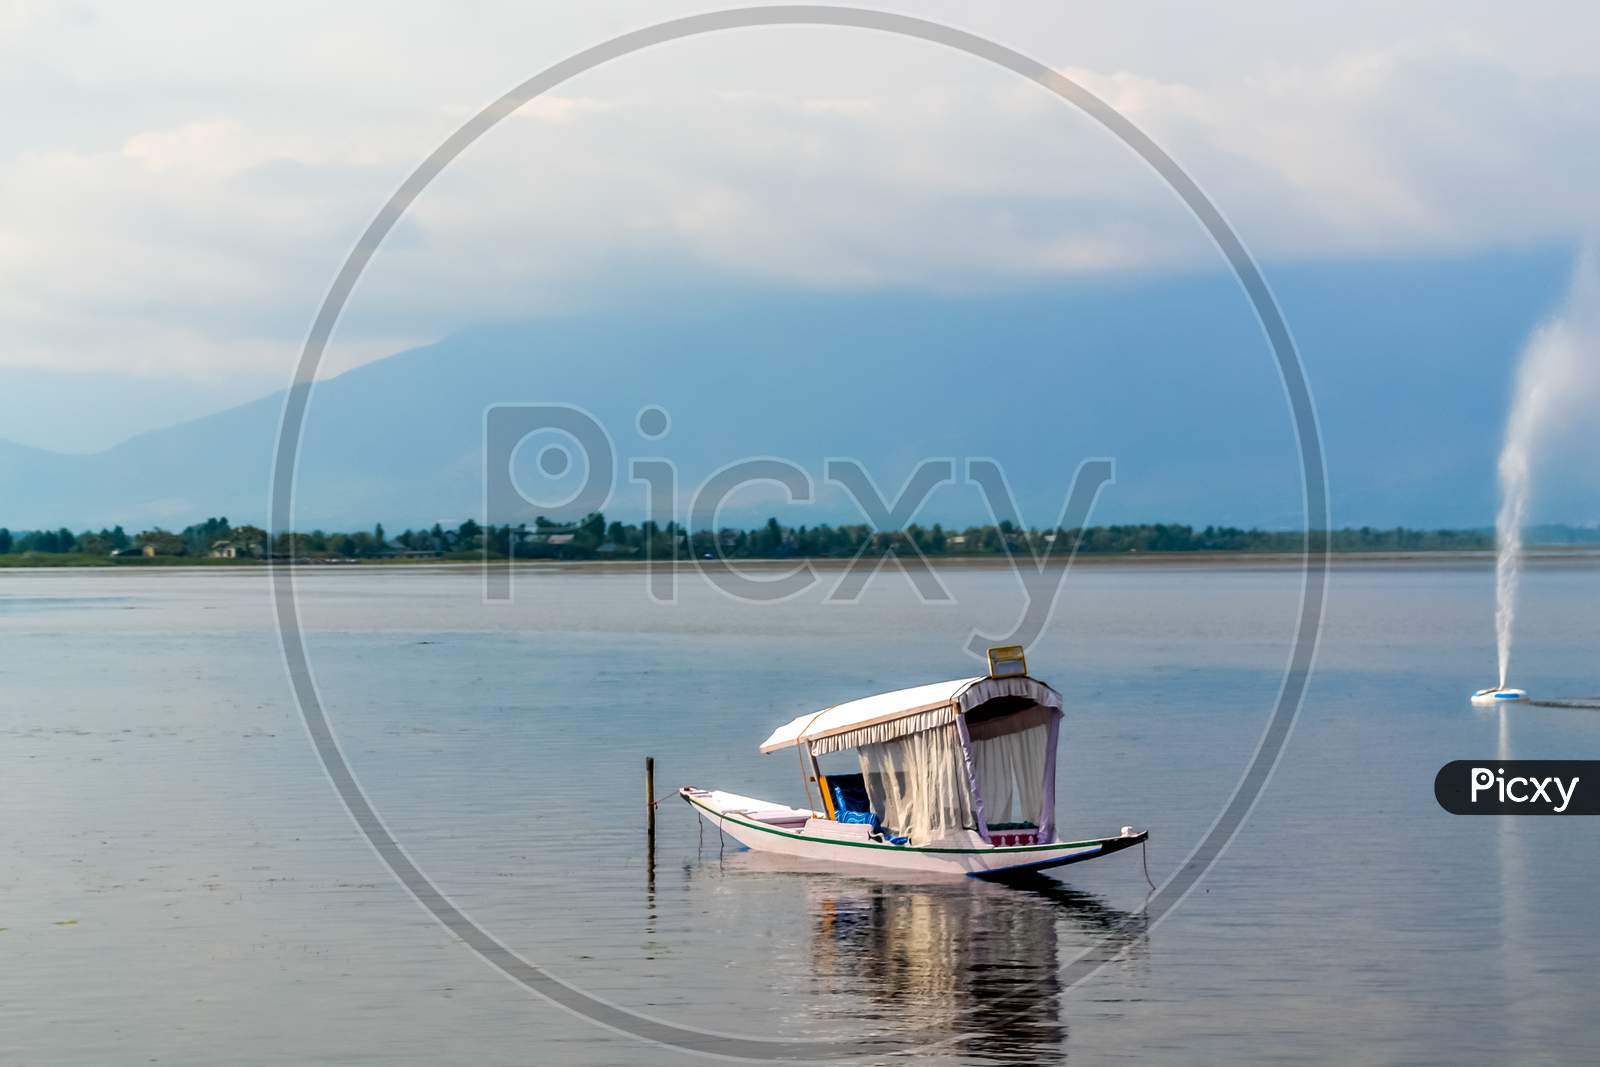 A House Boat Or Shikara Boat Ride On Dal Lake Srinagar, Jammu And Kashmir, India. The Great Himalayas Range Are Visible At A Distance. Image Taken In Romantic Sunset Time.